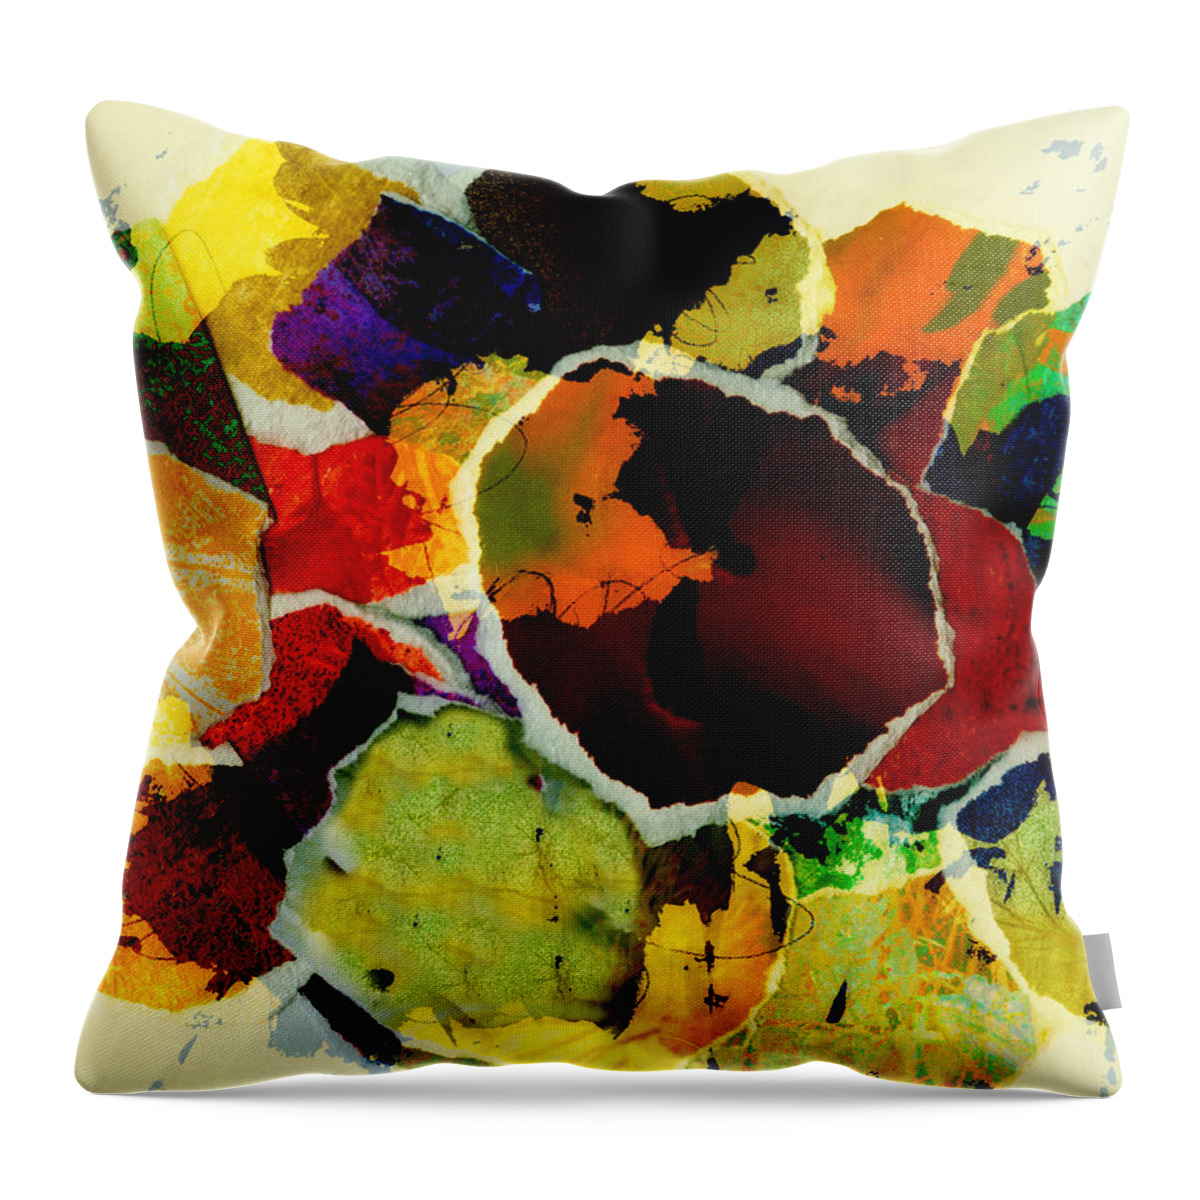 Abstract Throw Pillow featuring the digital art Collage Art Torn Paper by Ann Powell